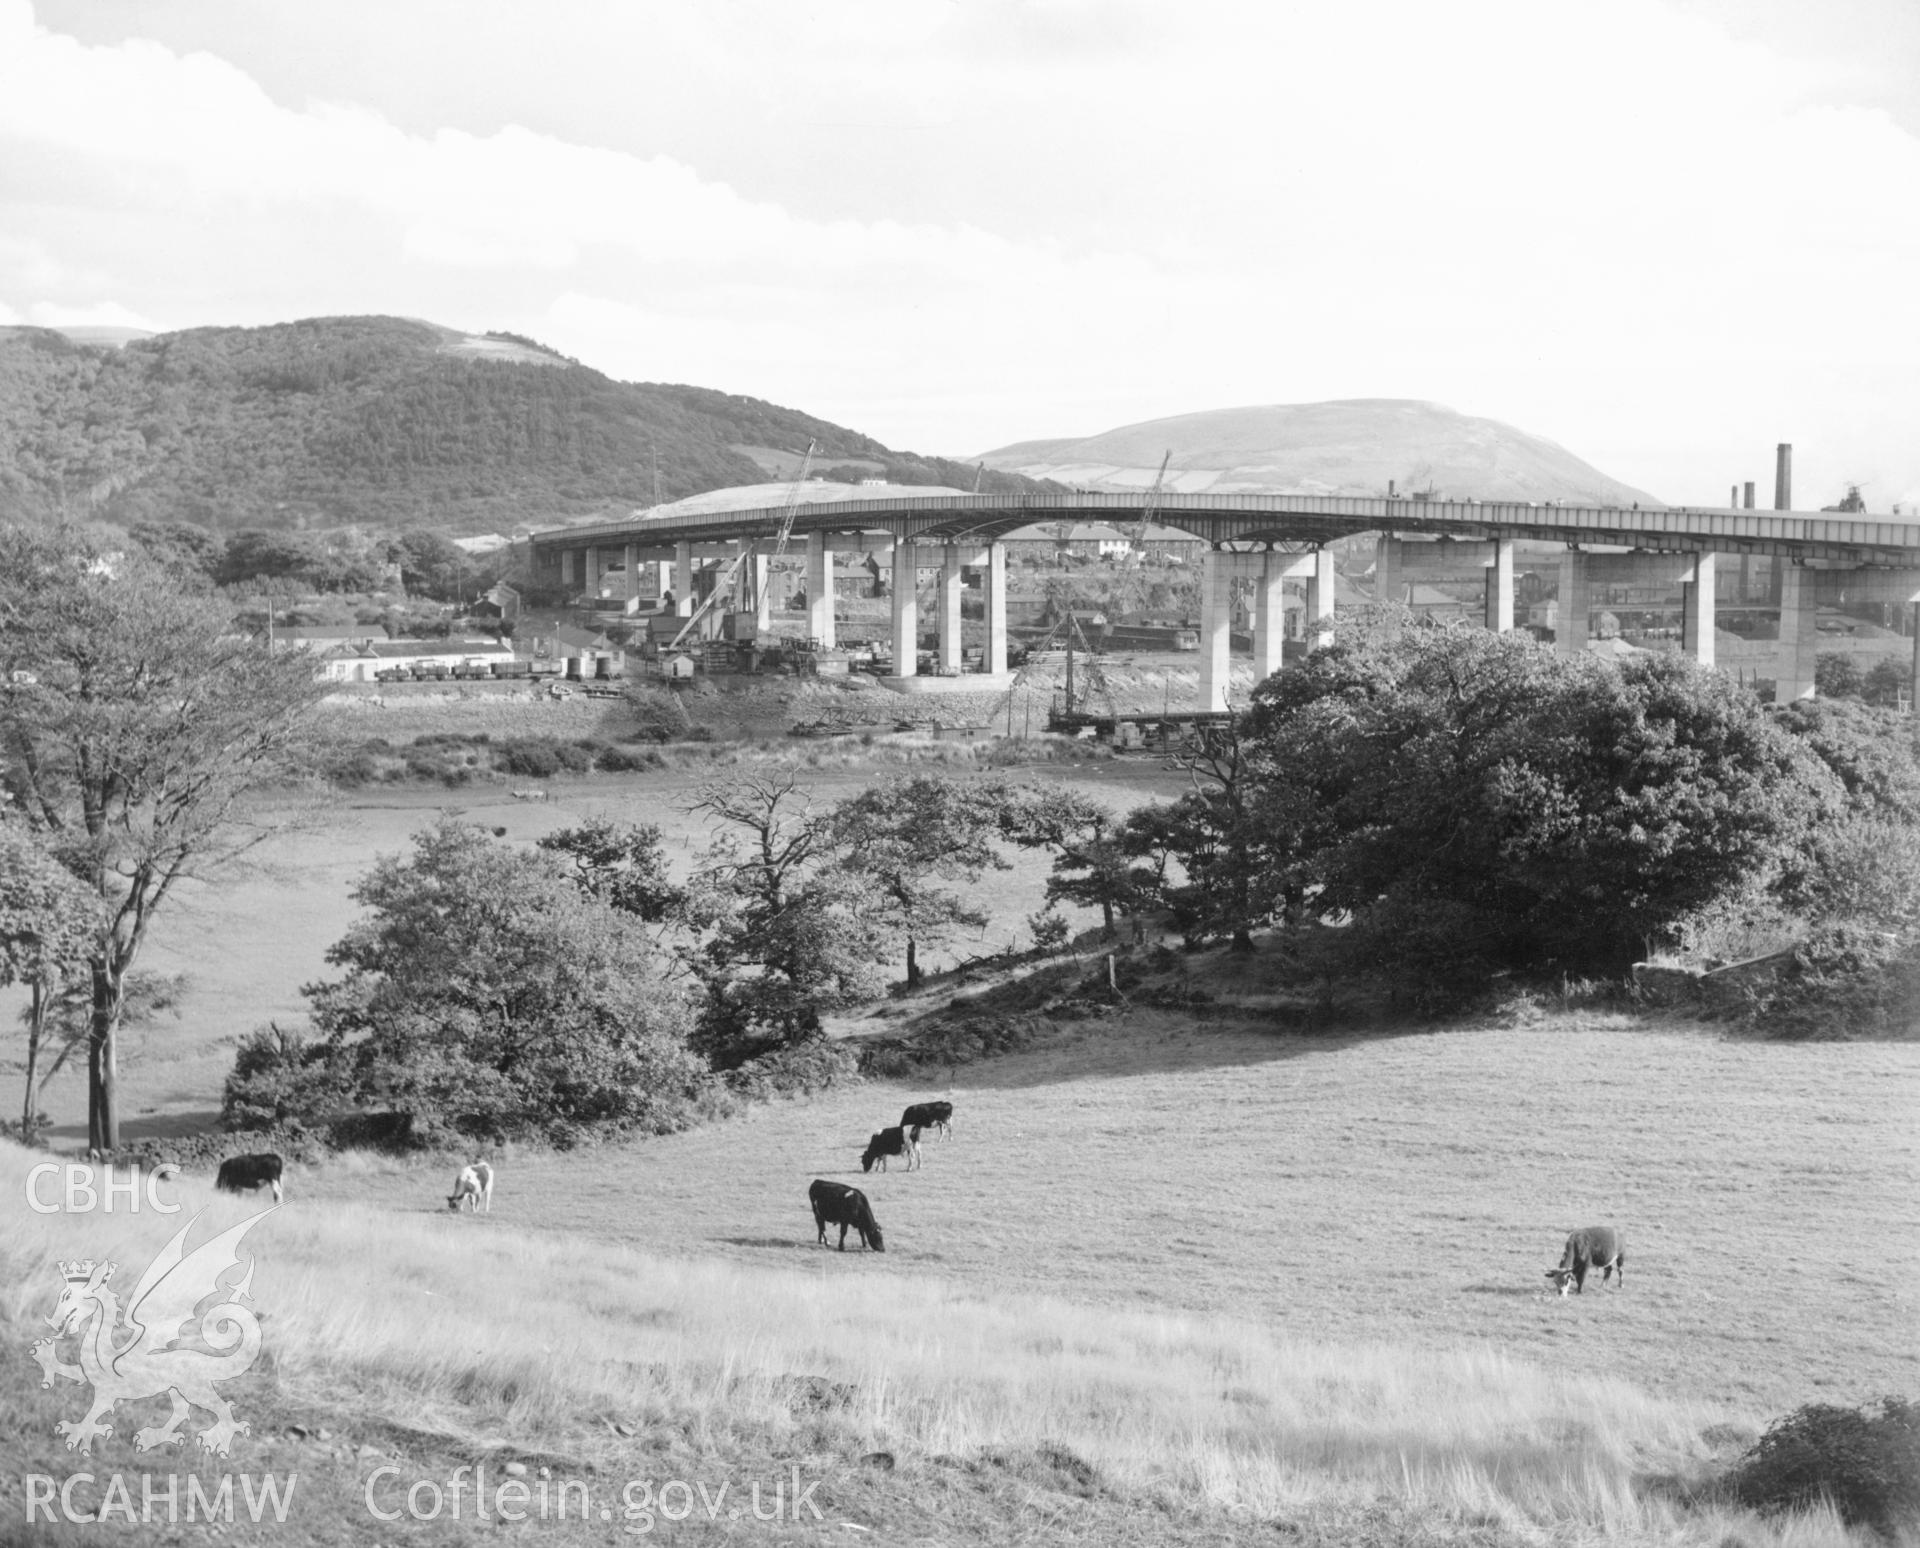 1 b/w print showing view of the A48 Neath bridge on completion, dated 1955, collated by the former Central Office of Information.